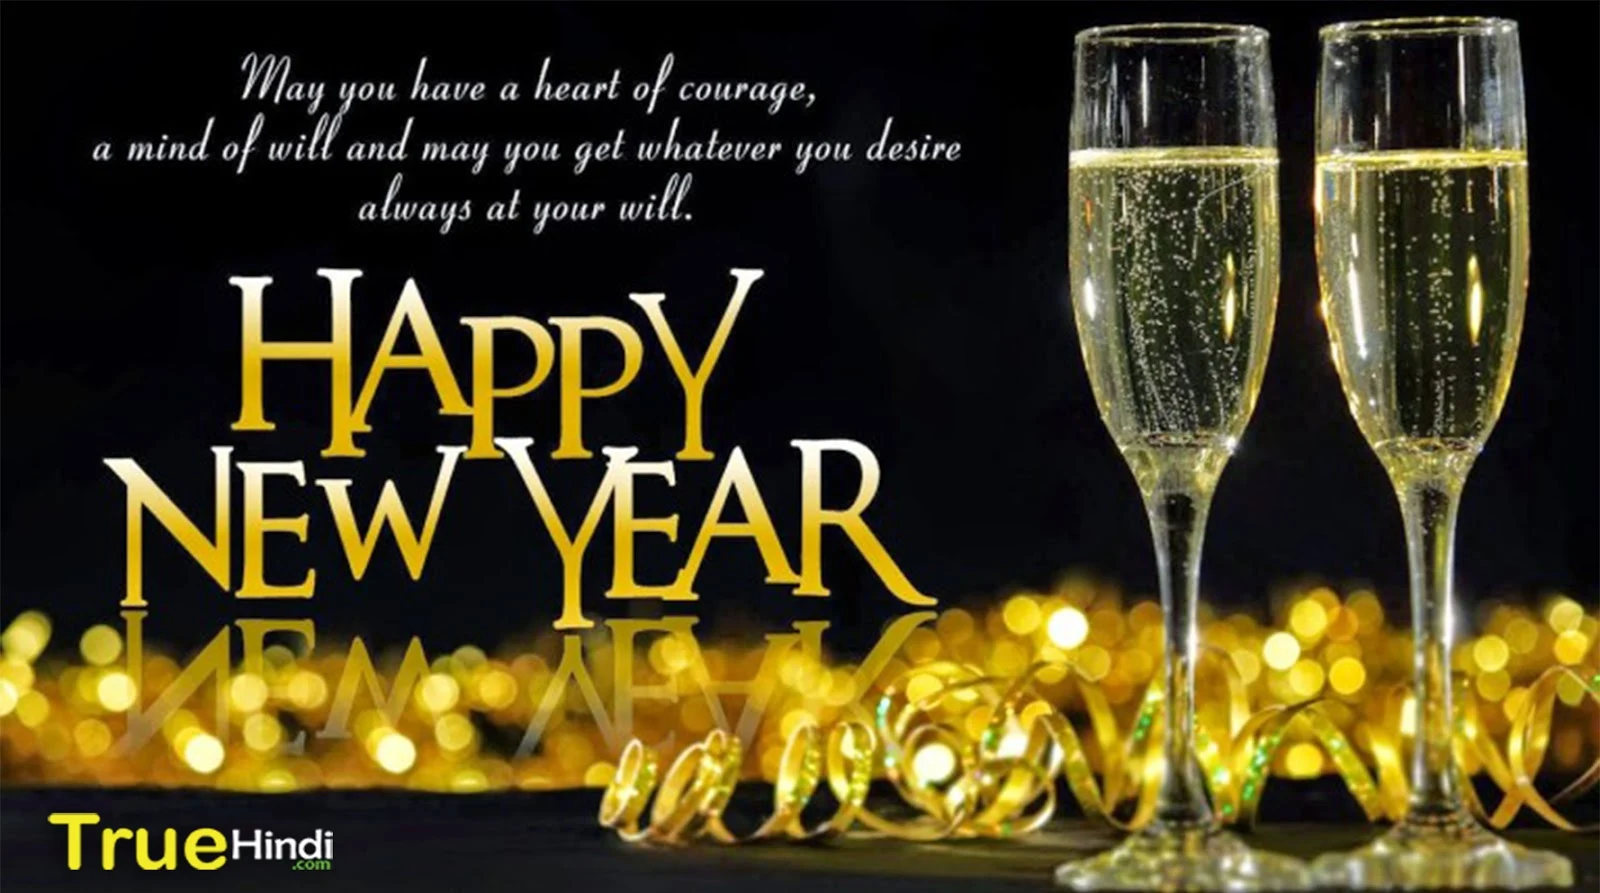 FREE] Happy New Year 2019 Hd Wallpapers Images Pictures 